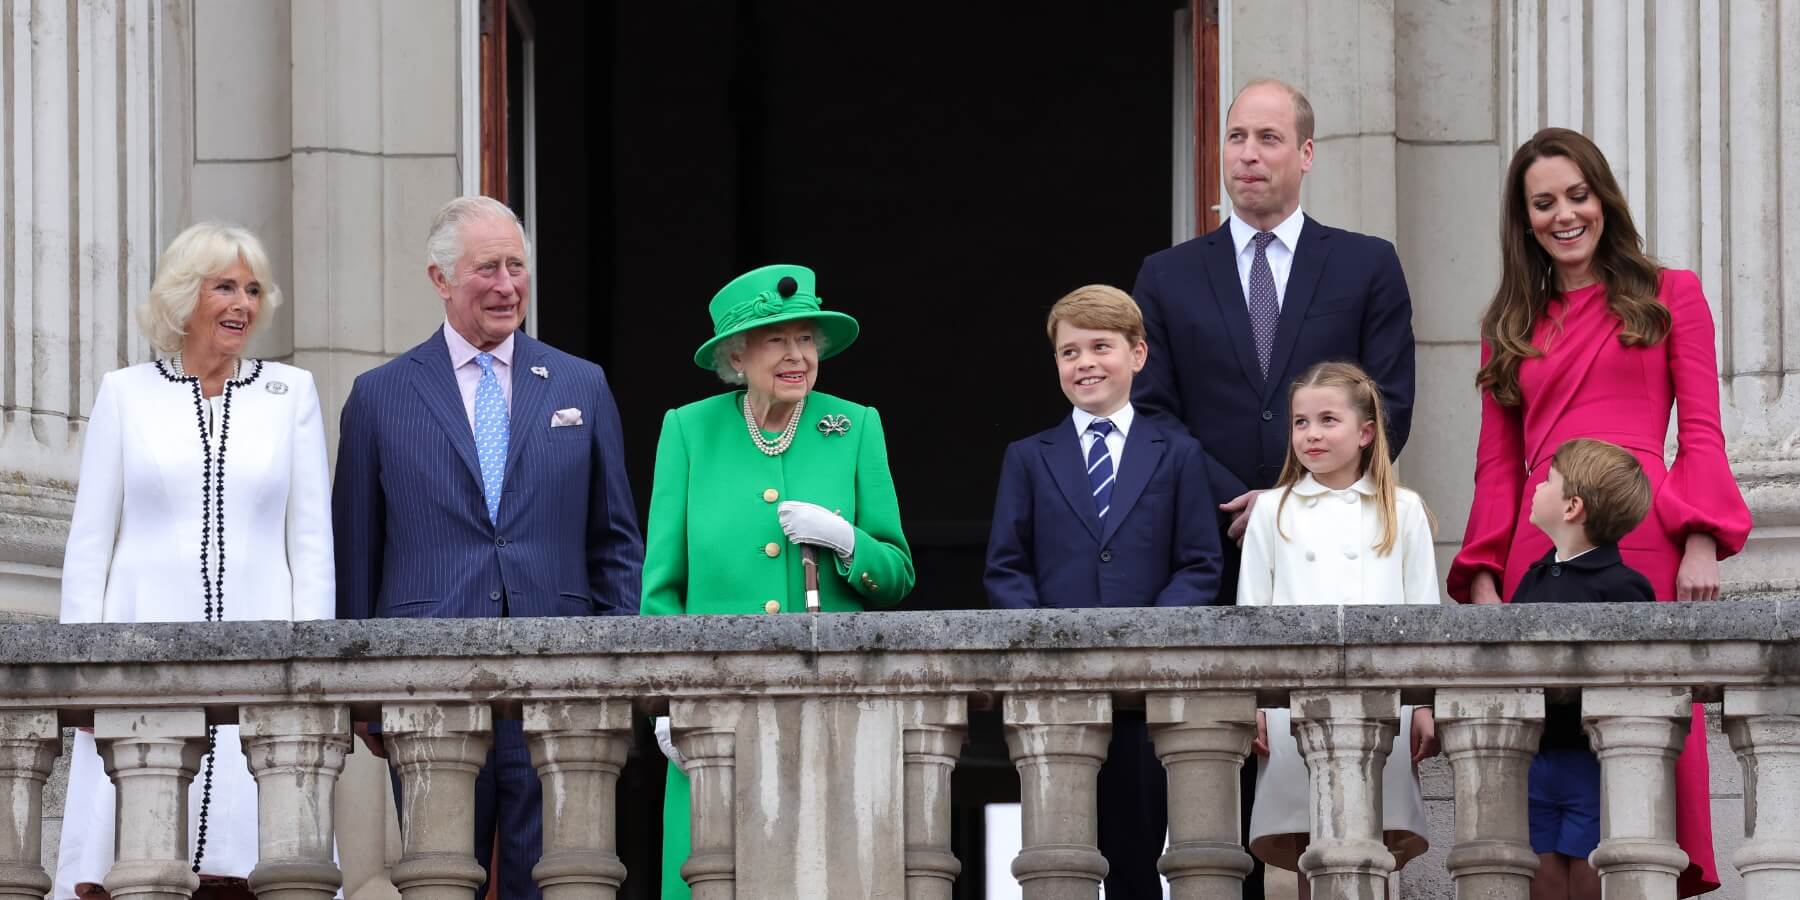 Camilla Parker Bowles, King Charles, Queen Elizabeth, Prince William, Kate Middleton, Prince George, Princess Charlotte and Prince Louis photographed in 2022 at the the queen's Platinum Jubilee event.